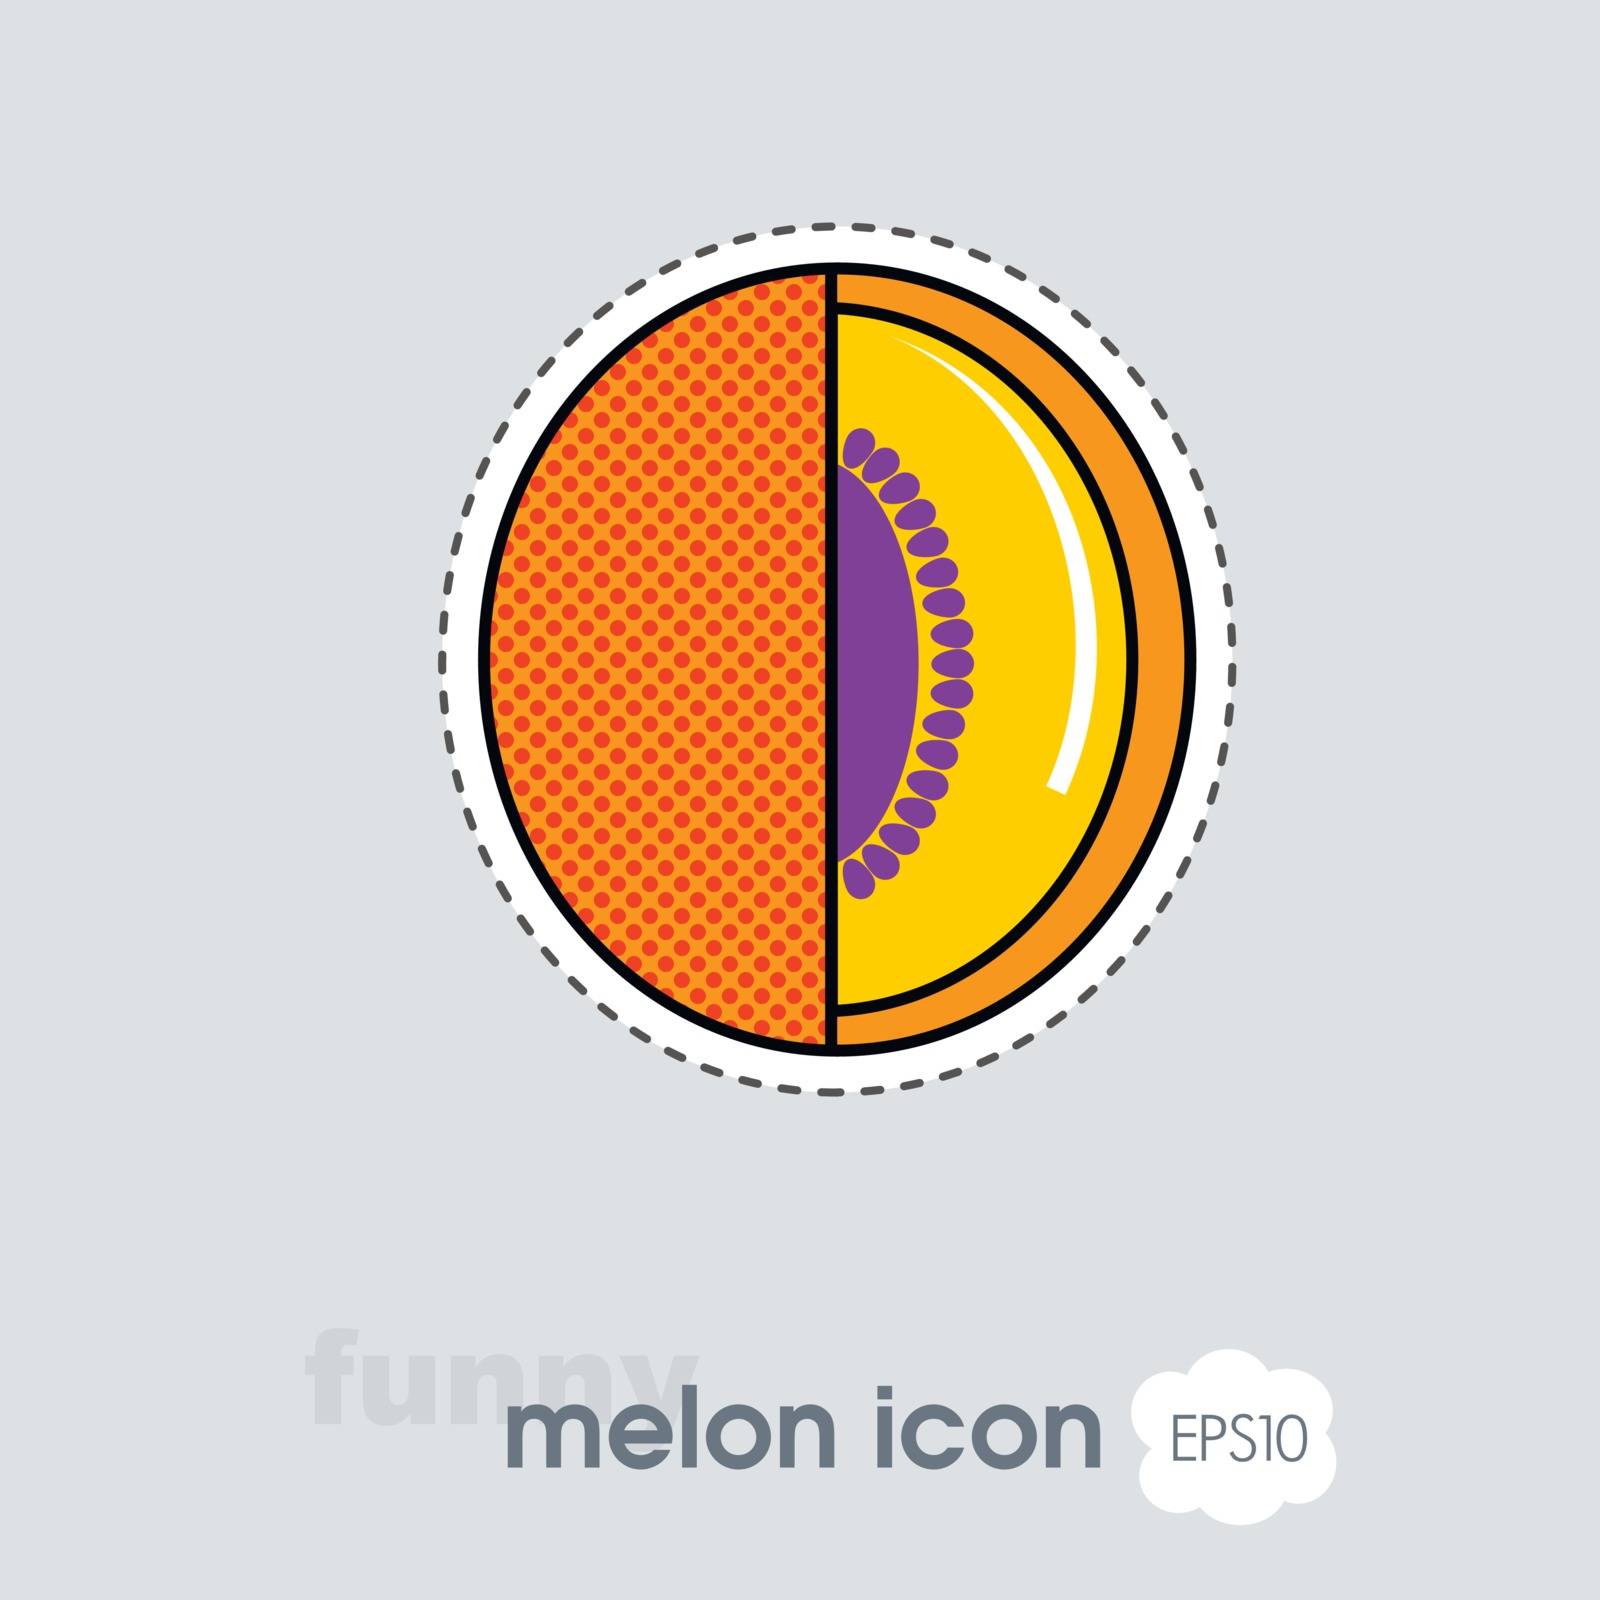 Melon icon. Melon fruit sign. Vector illustration for food apps and websites